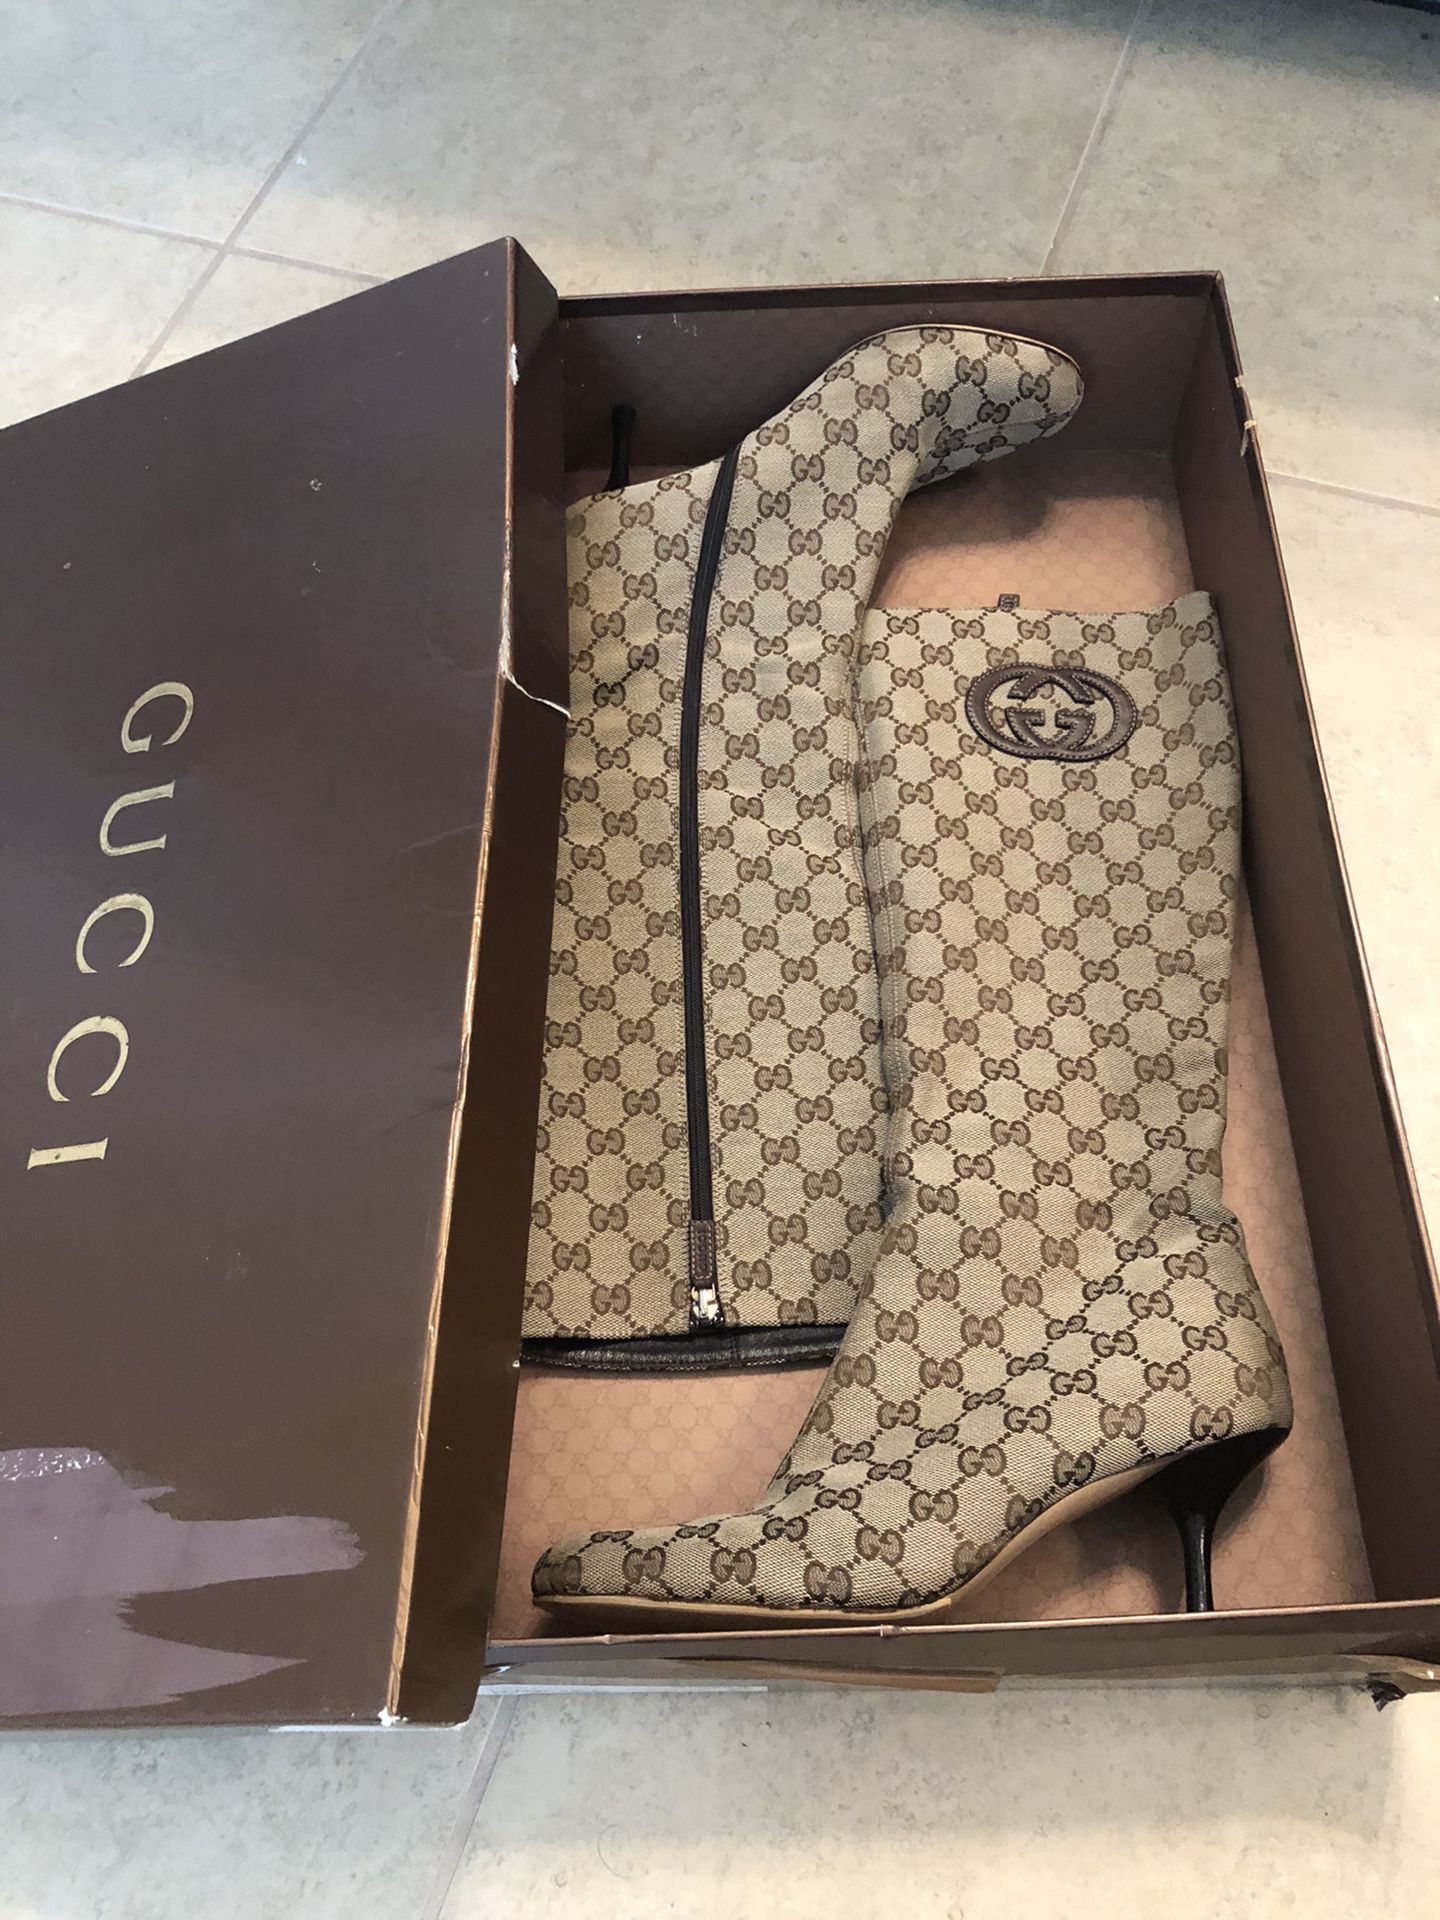 Gucci boots (Authentic) size 8 1/2